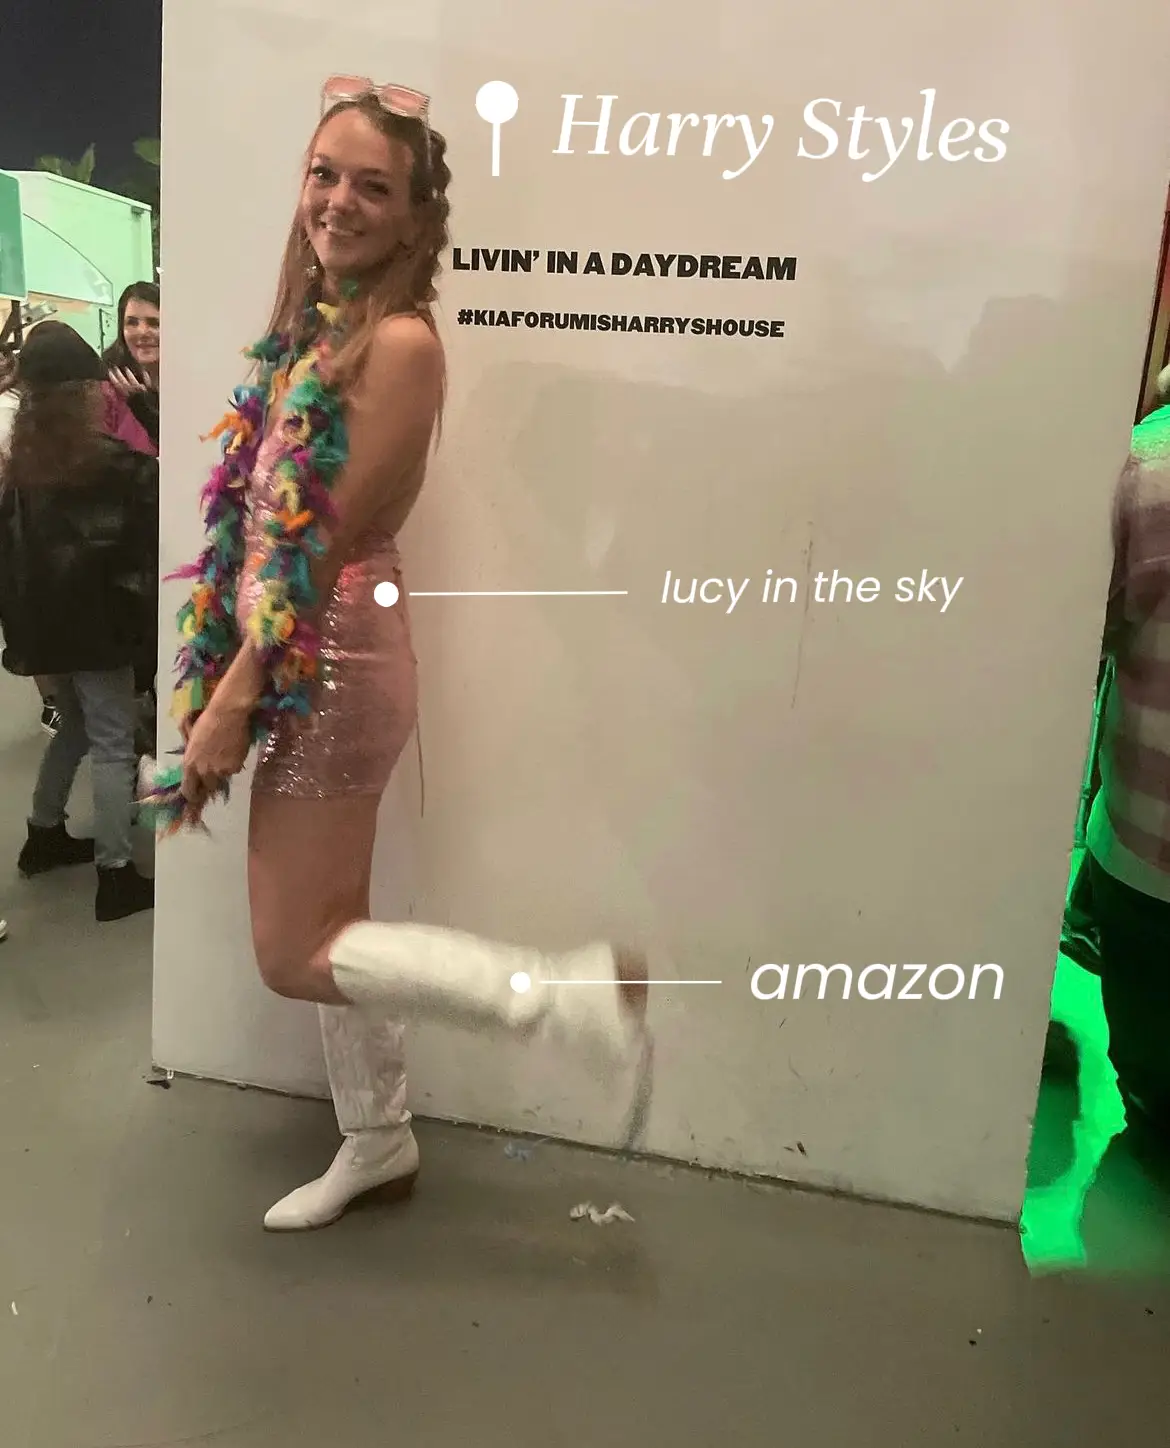  A woman wearing a colorful skirt and white boots is standing in front of a wall with a sign that says "Lucy in the sky". She is smiling and appears to be enjoying herself.